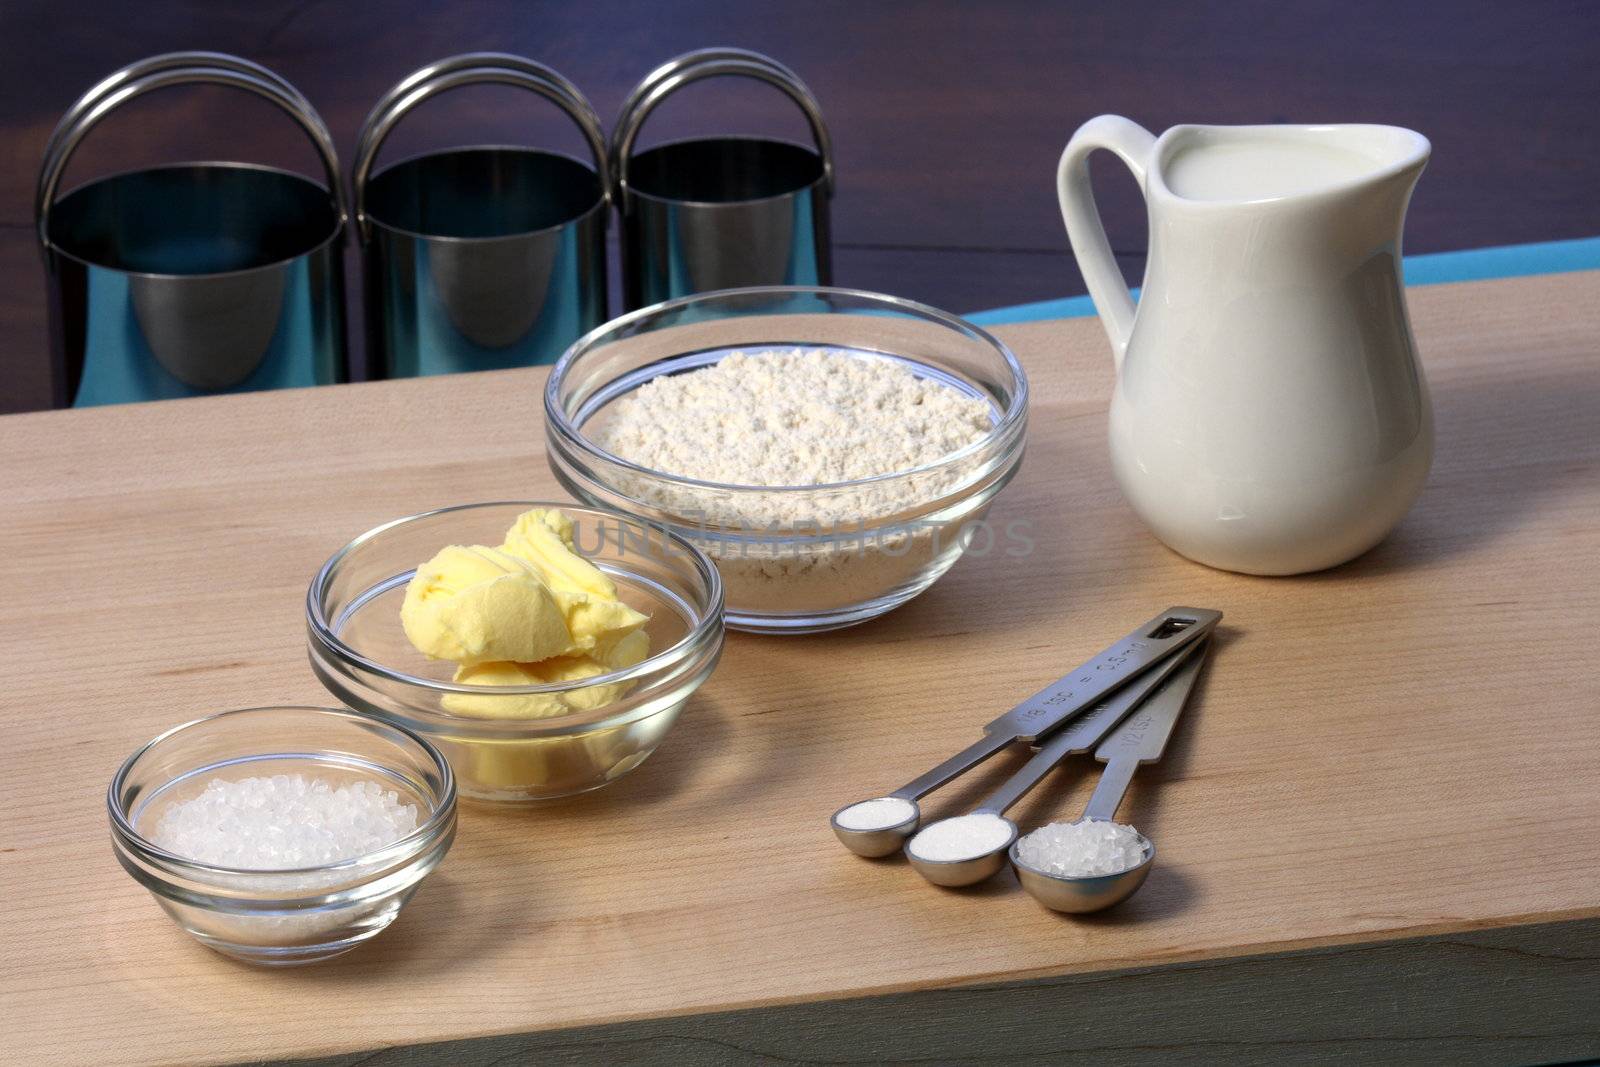 dough ingredients and kitchen utensils on wood cutting board